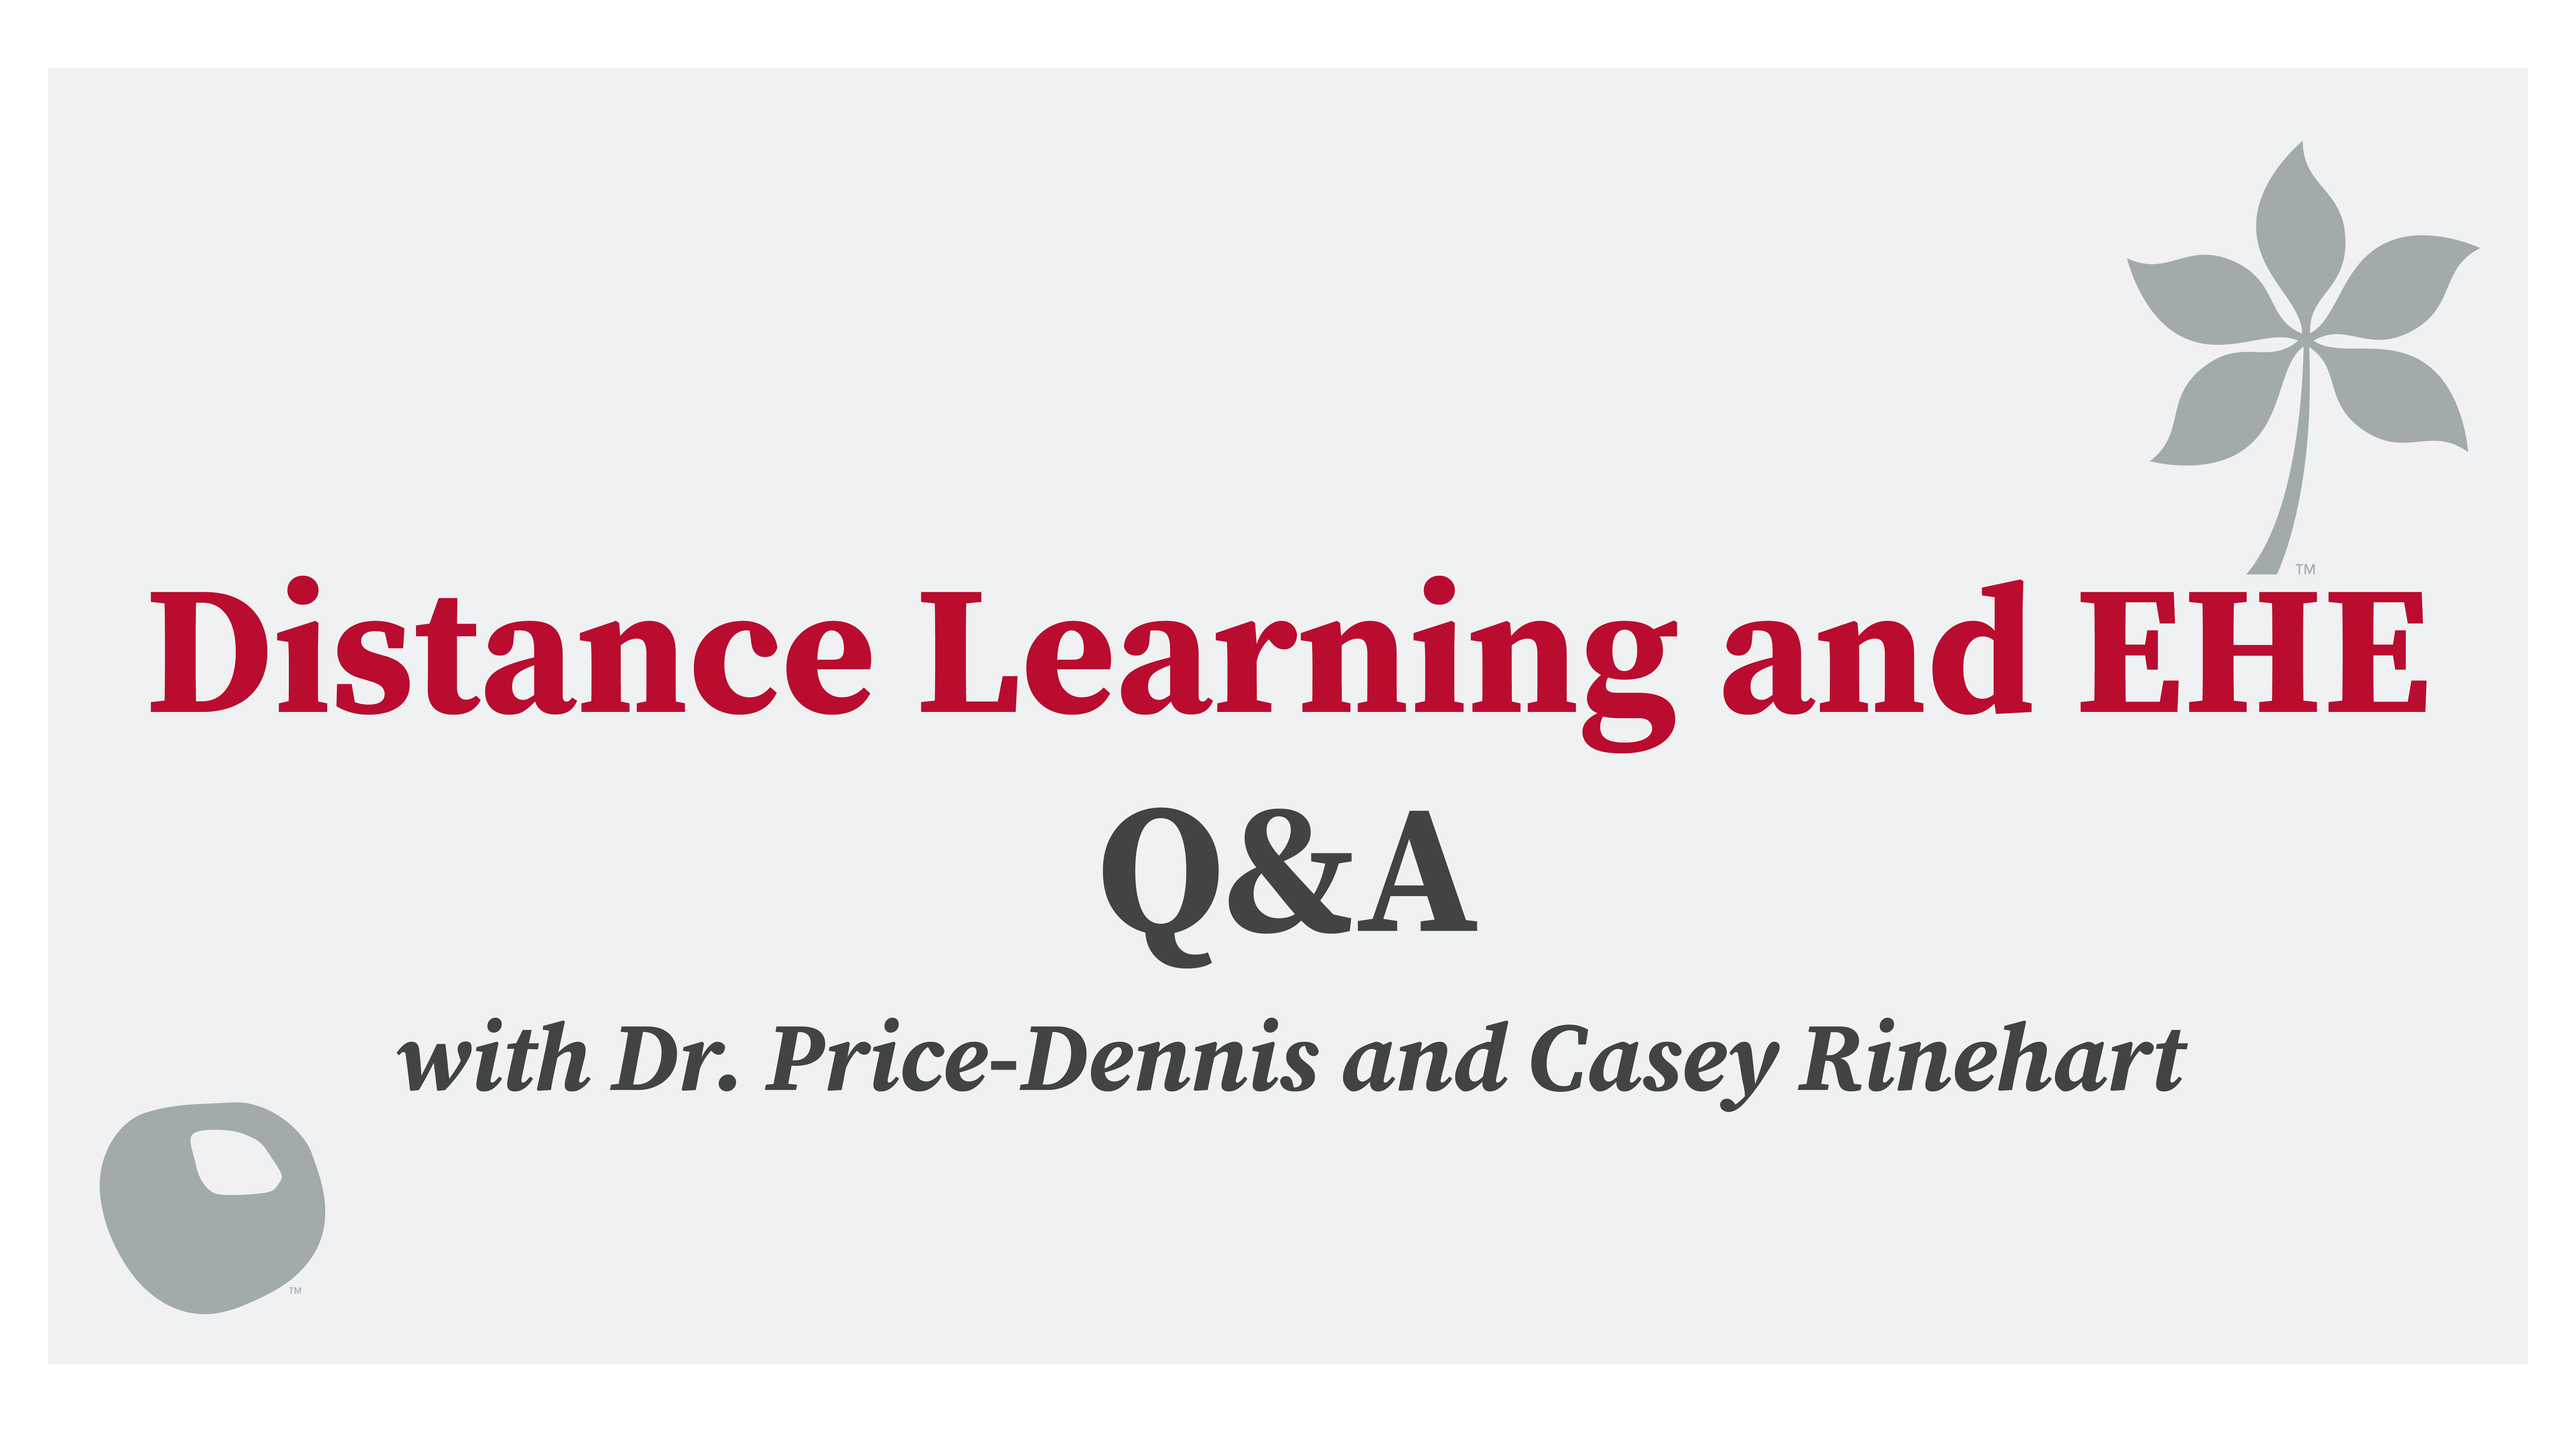 Distance Learning and EHE Q&A with Dr. Price-Dennis and Casey Rinehart